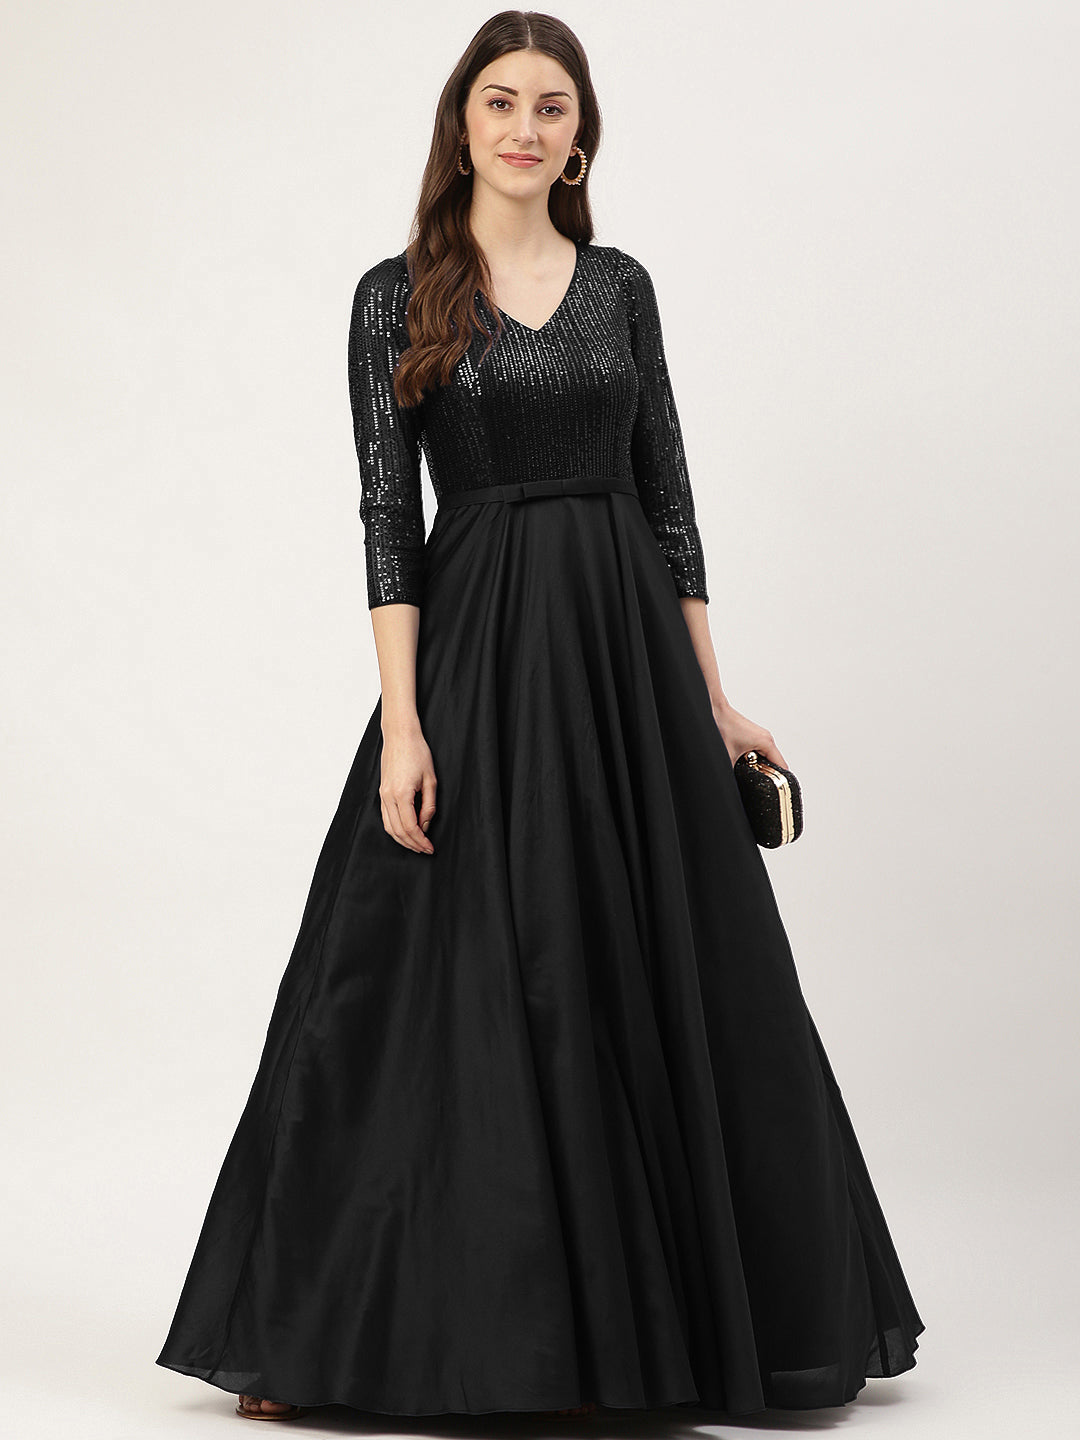 Black Embellished Ball Gown with 3/4 Sleeves